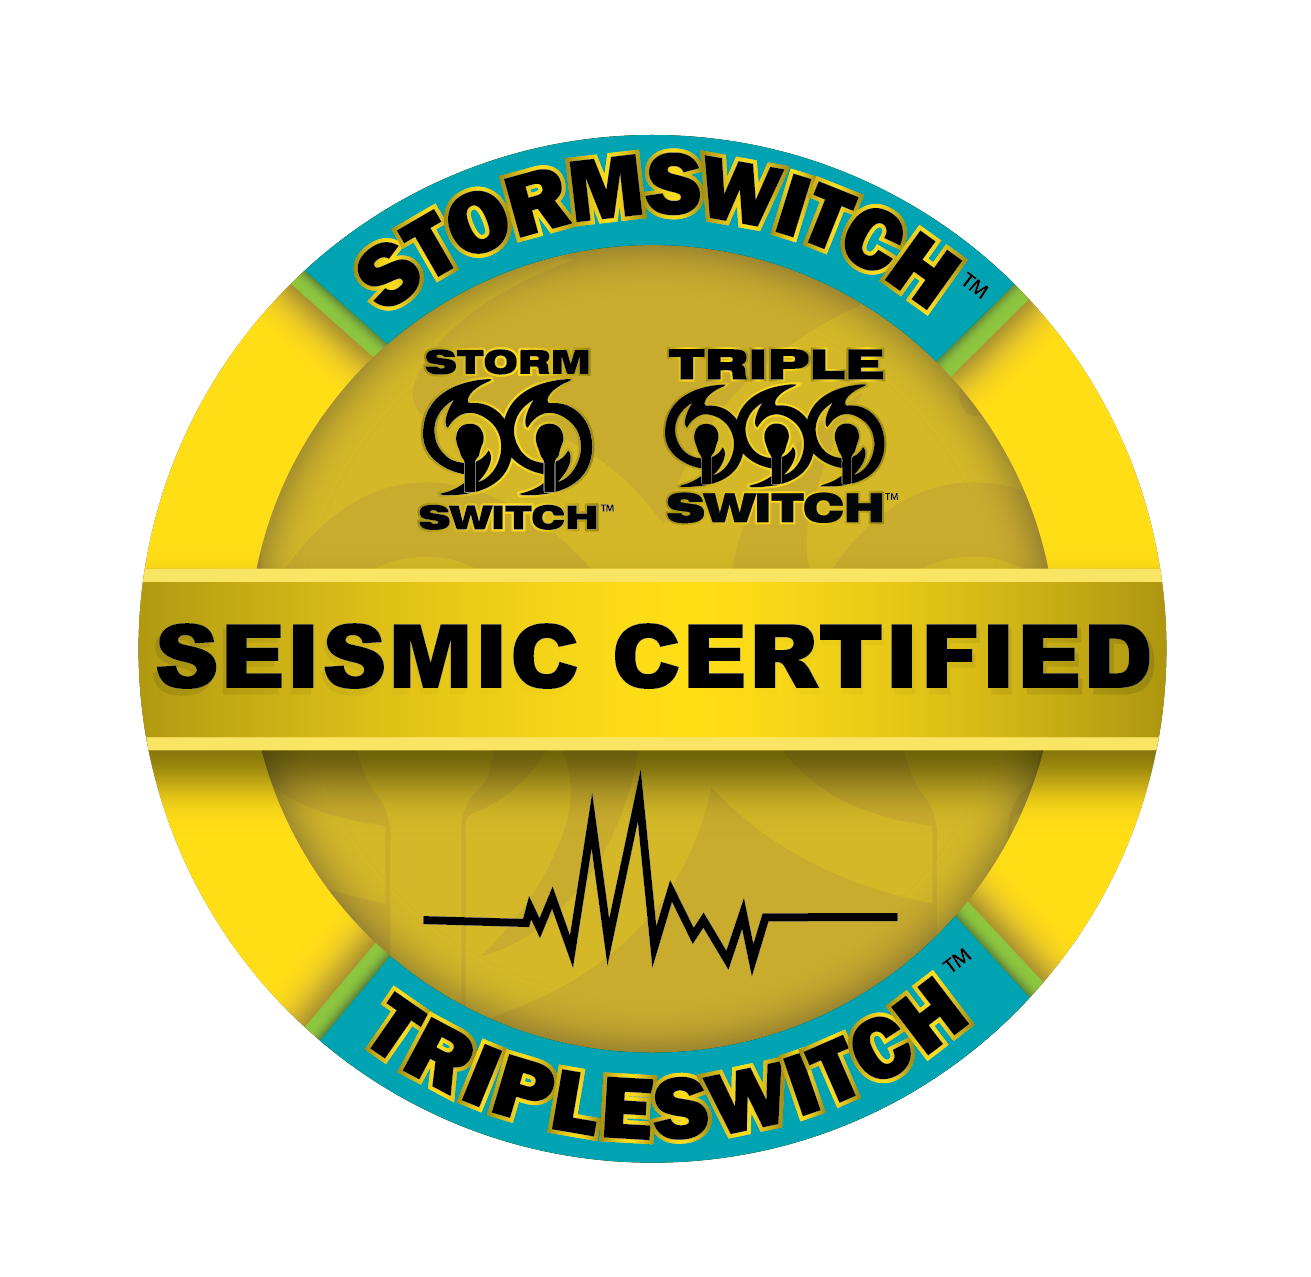 ESL Announces OSHPD OSP Special Seismic Certification of StormSwitch